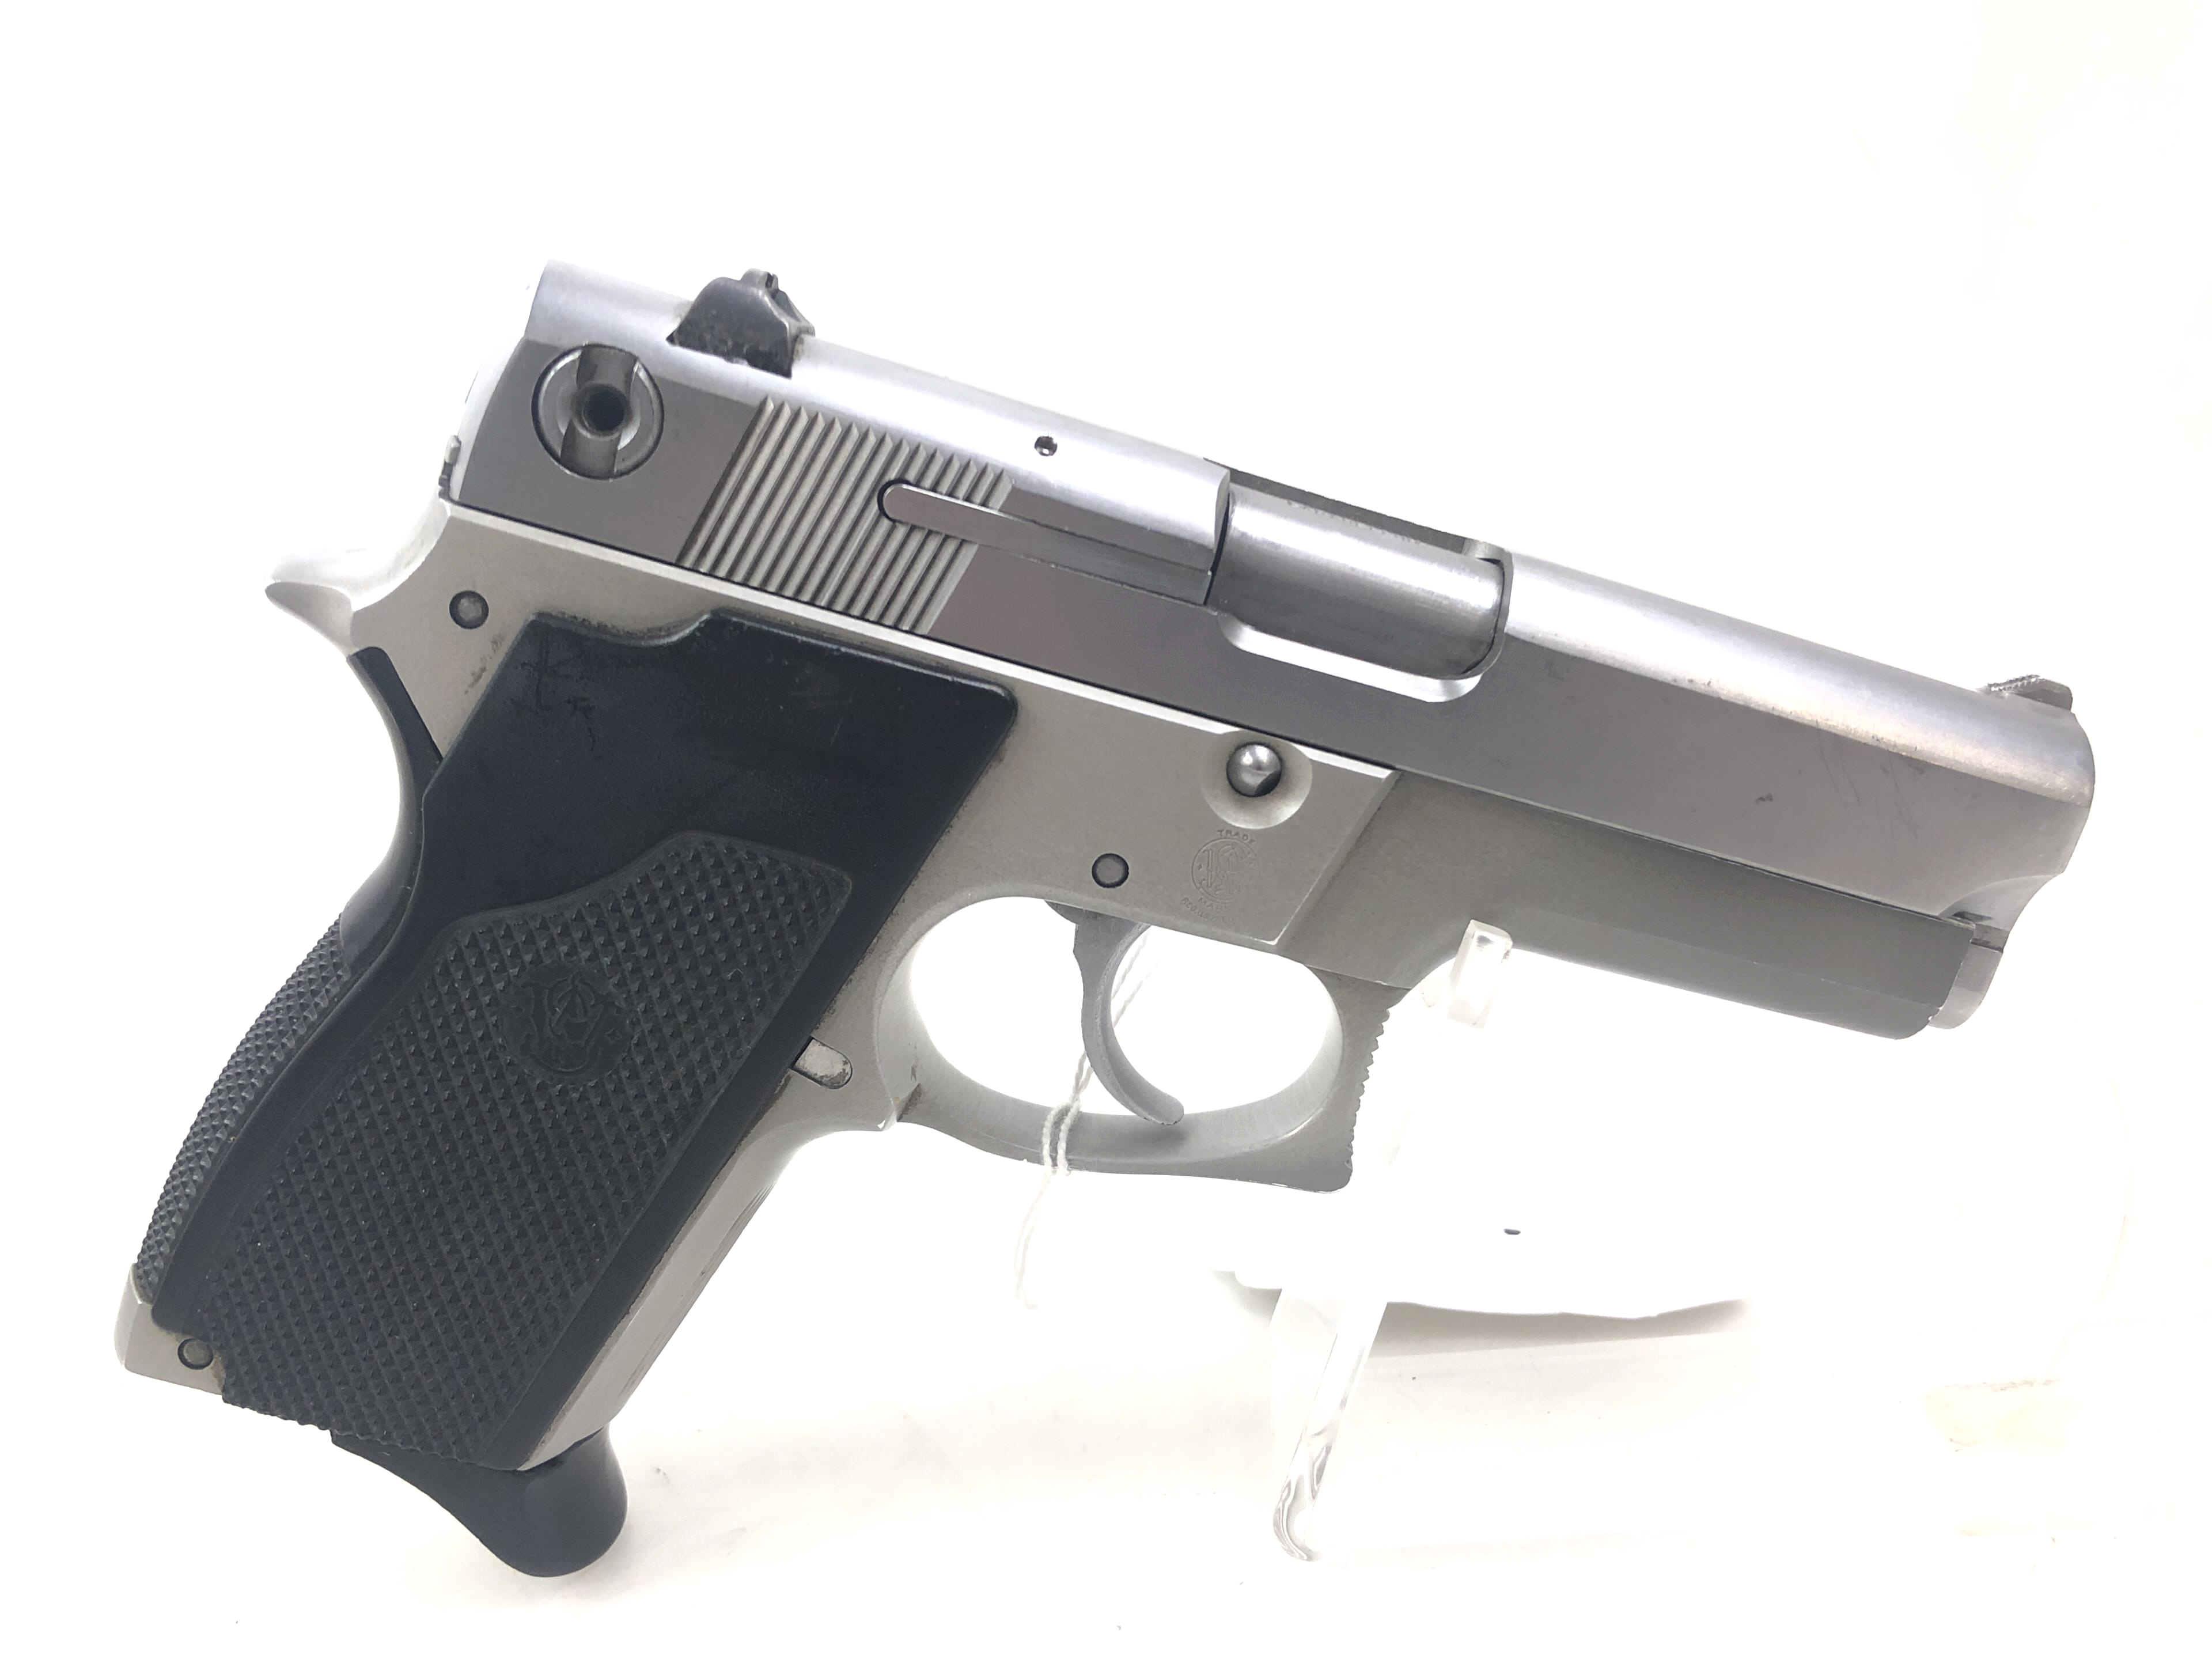 Smith & Wesson 9mm Pistol